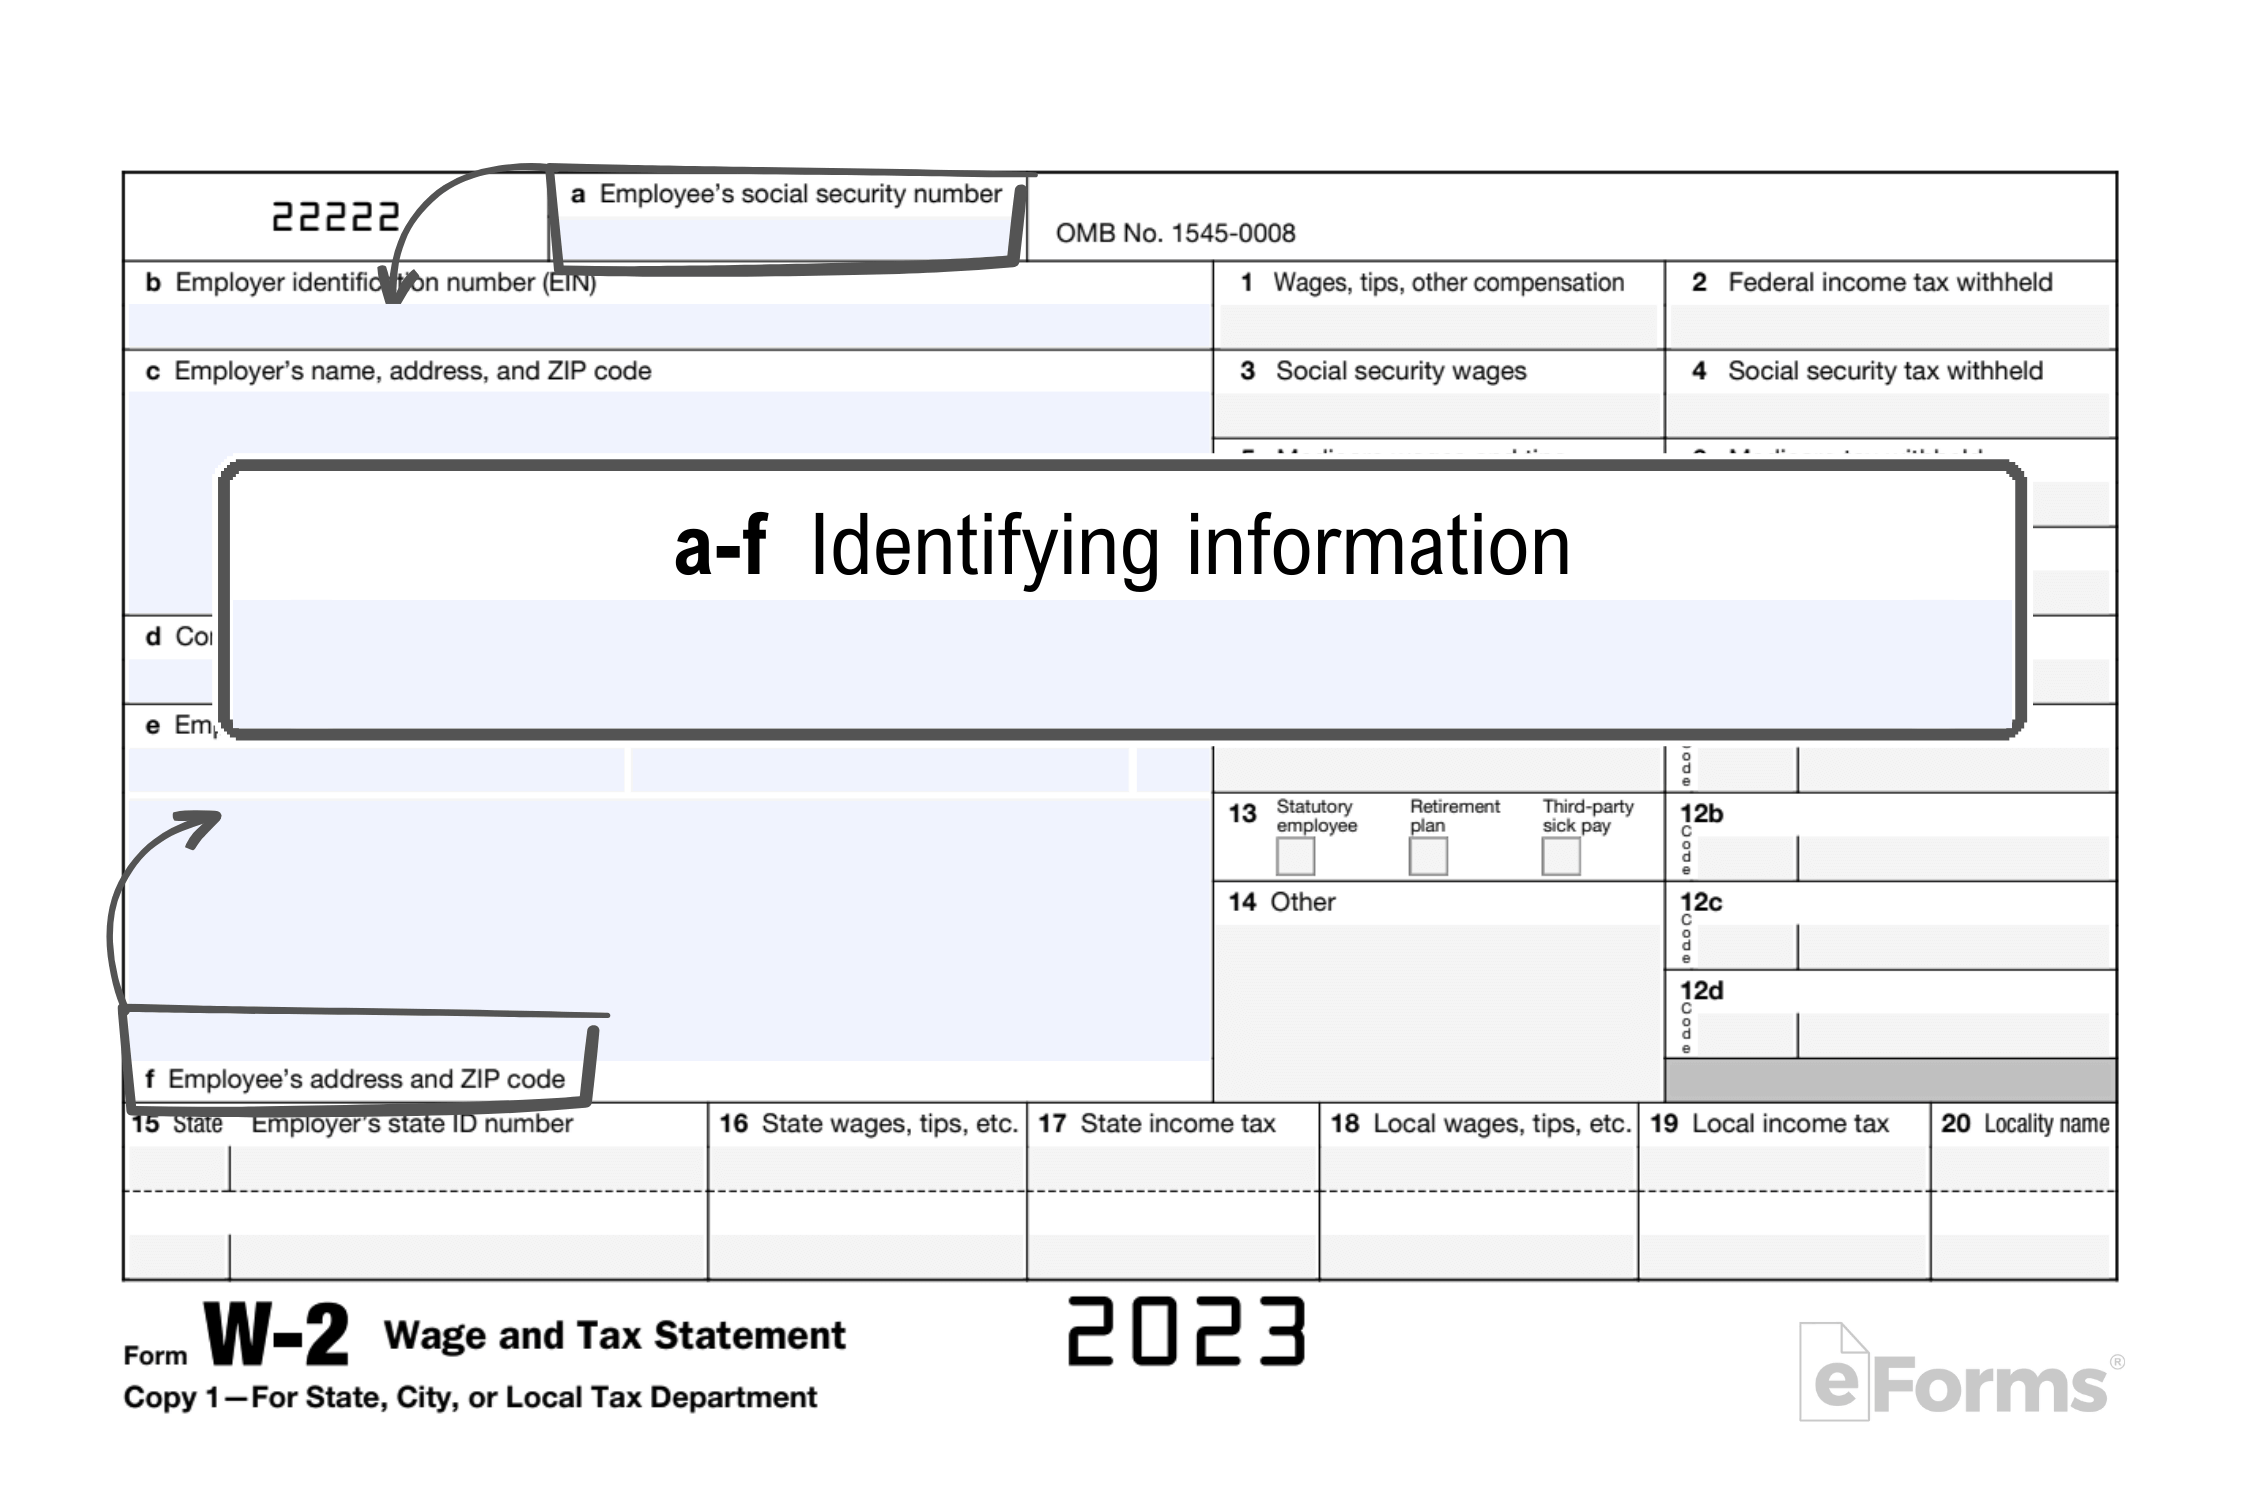 Free Irs Form W-2 | Wage And Tax Statement - Pdf – Eforms intended for When Does Ups Send W2 Forms